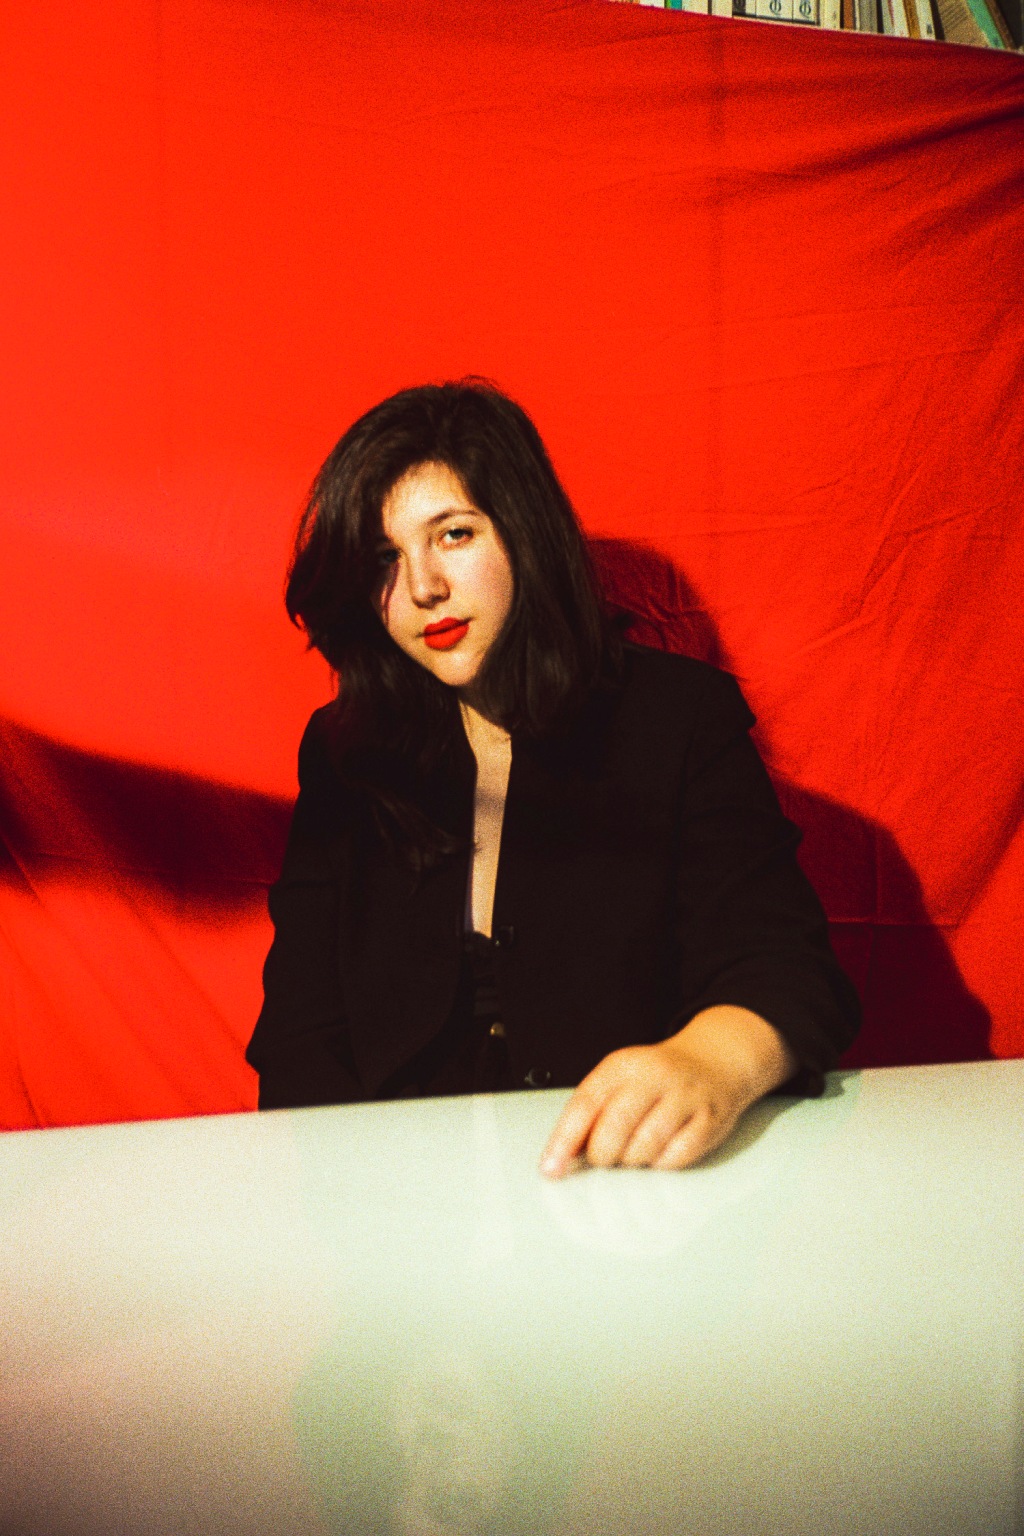 Lucy Dacus releases new track titled “Fool’s Gold”